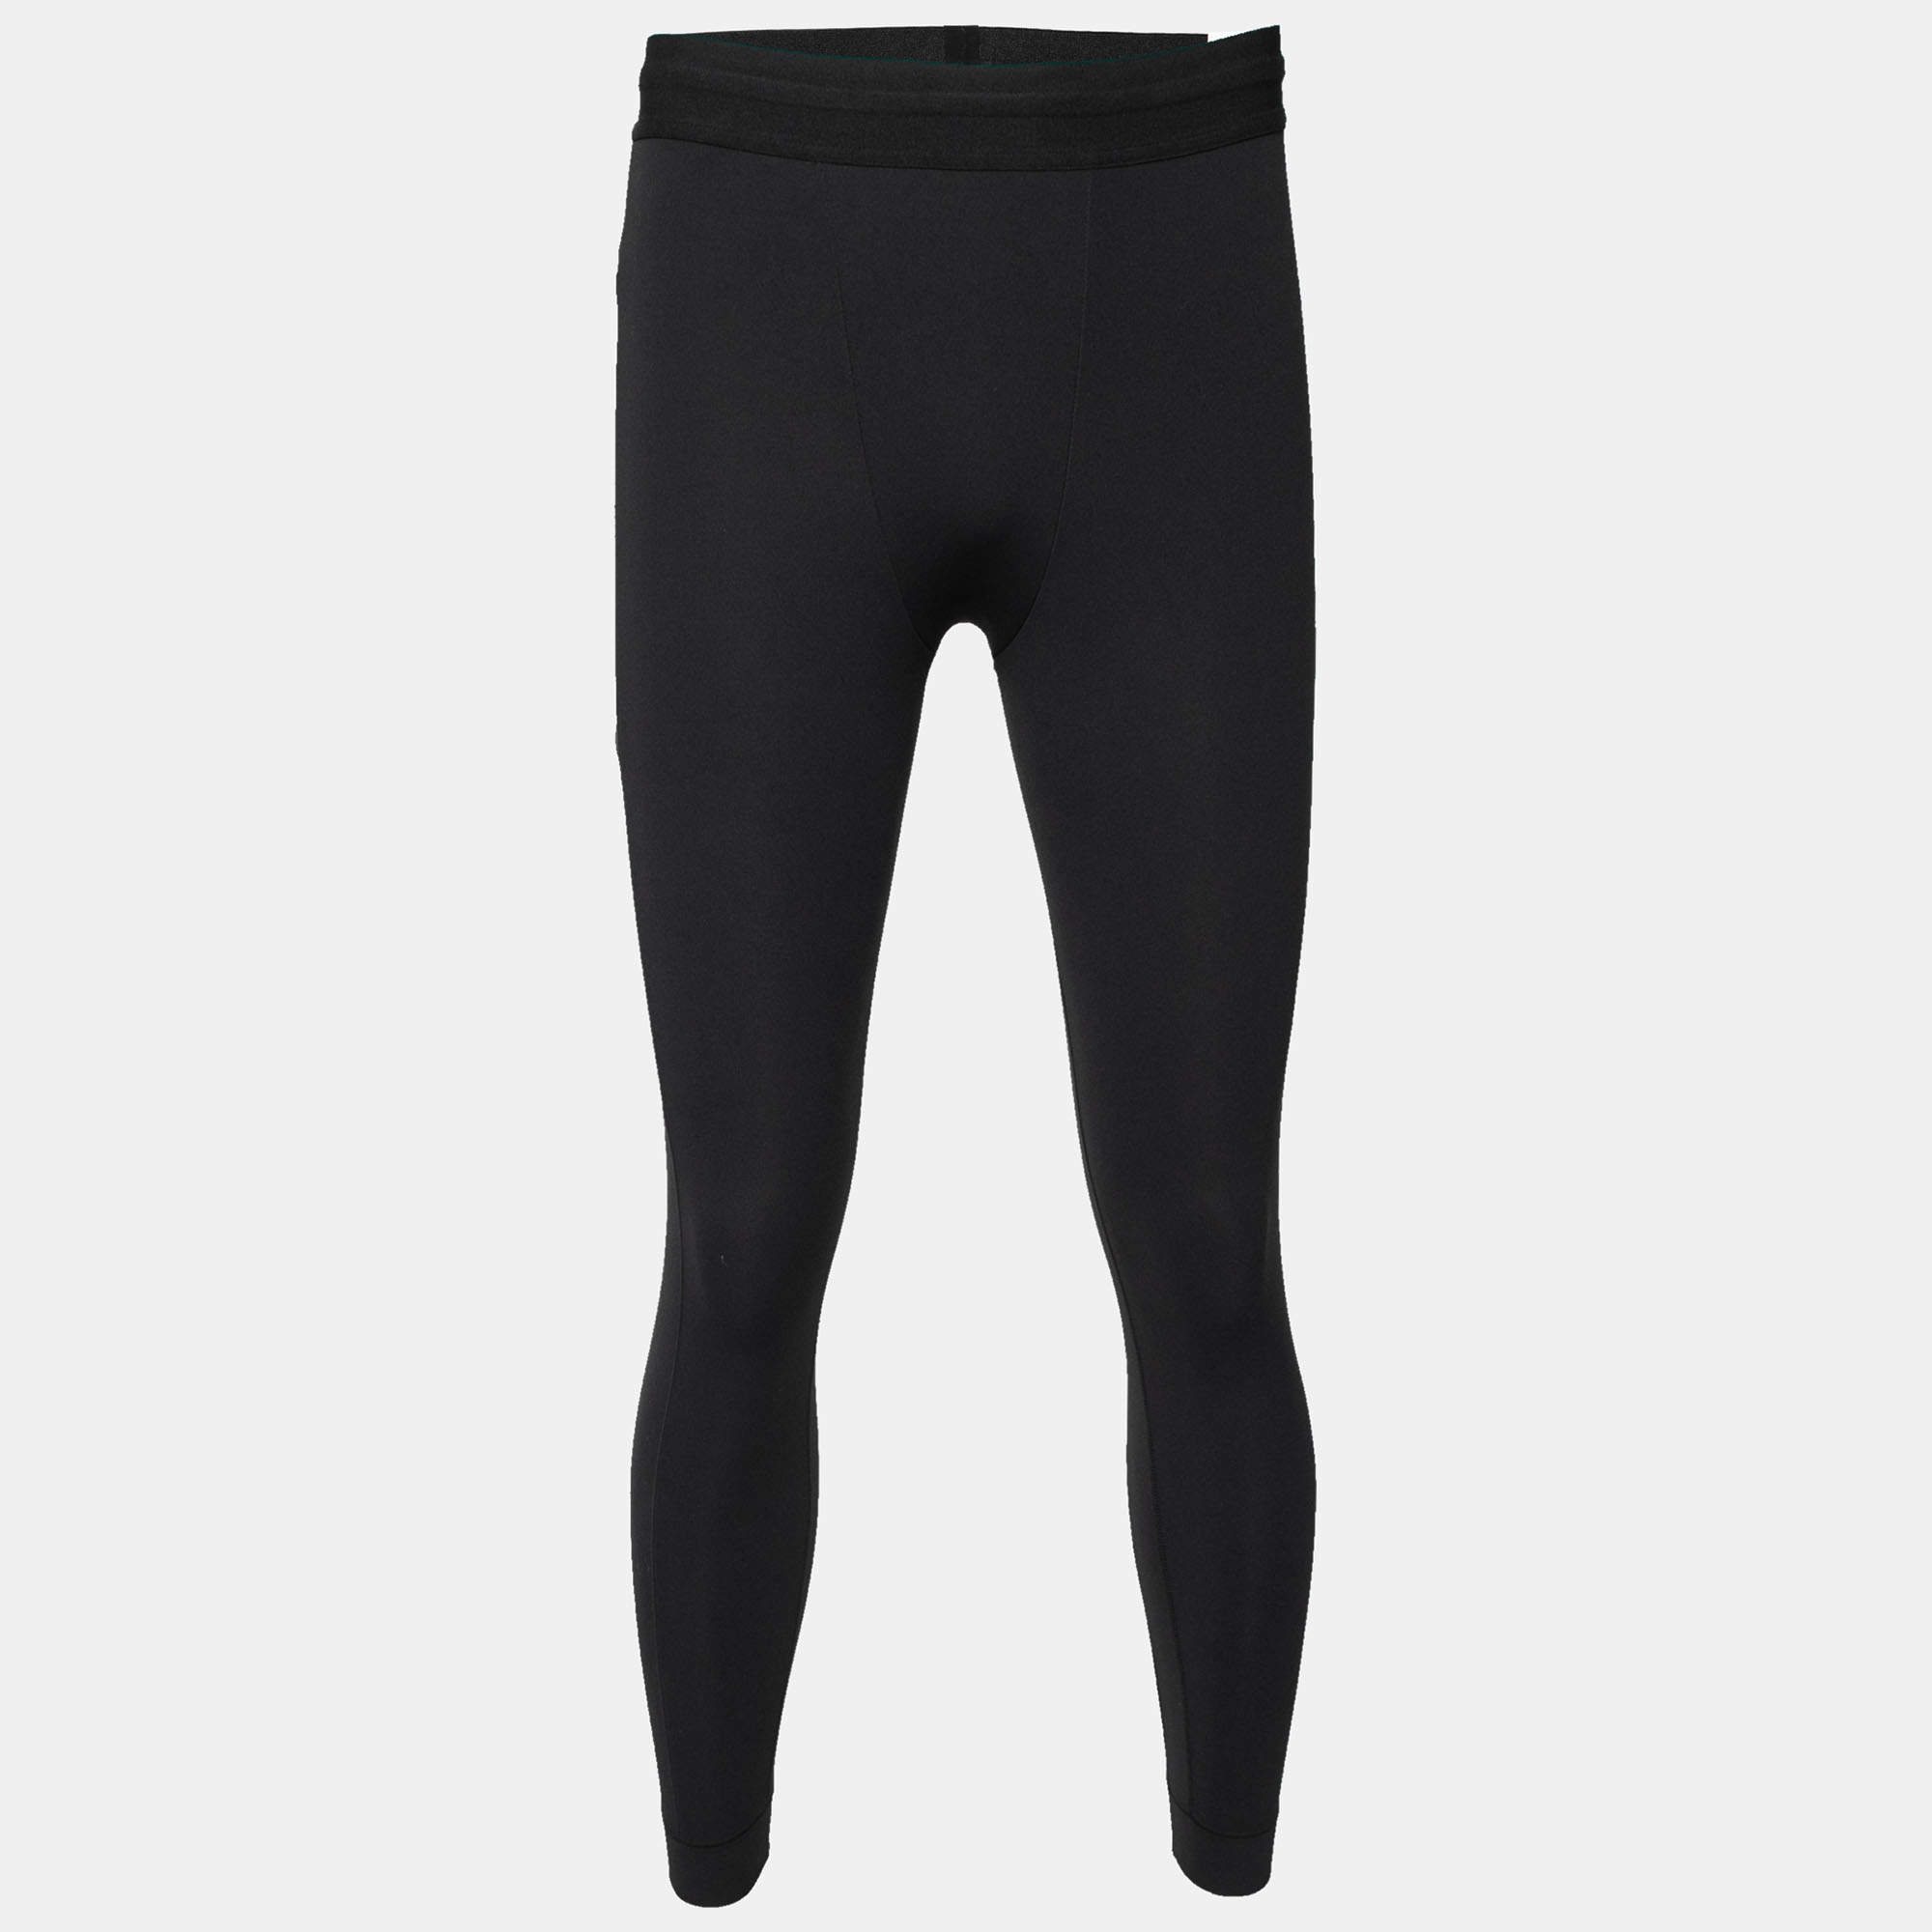 Simply the Best Men's Yoga and Active Pant from Anjali - The Everyday!